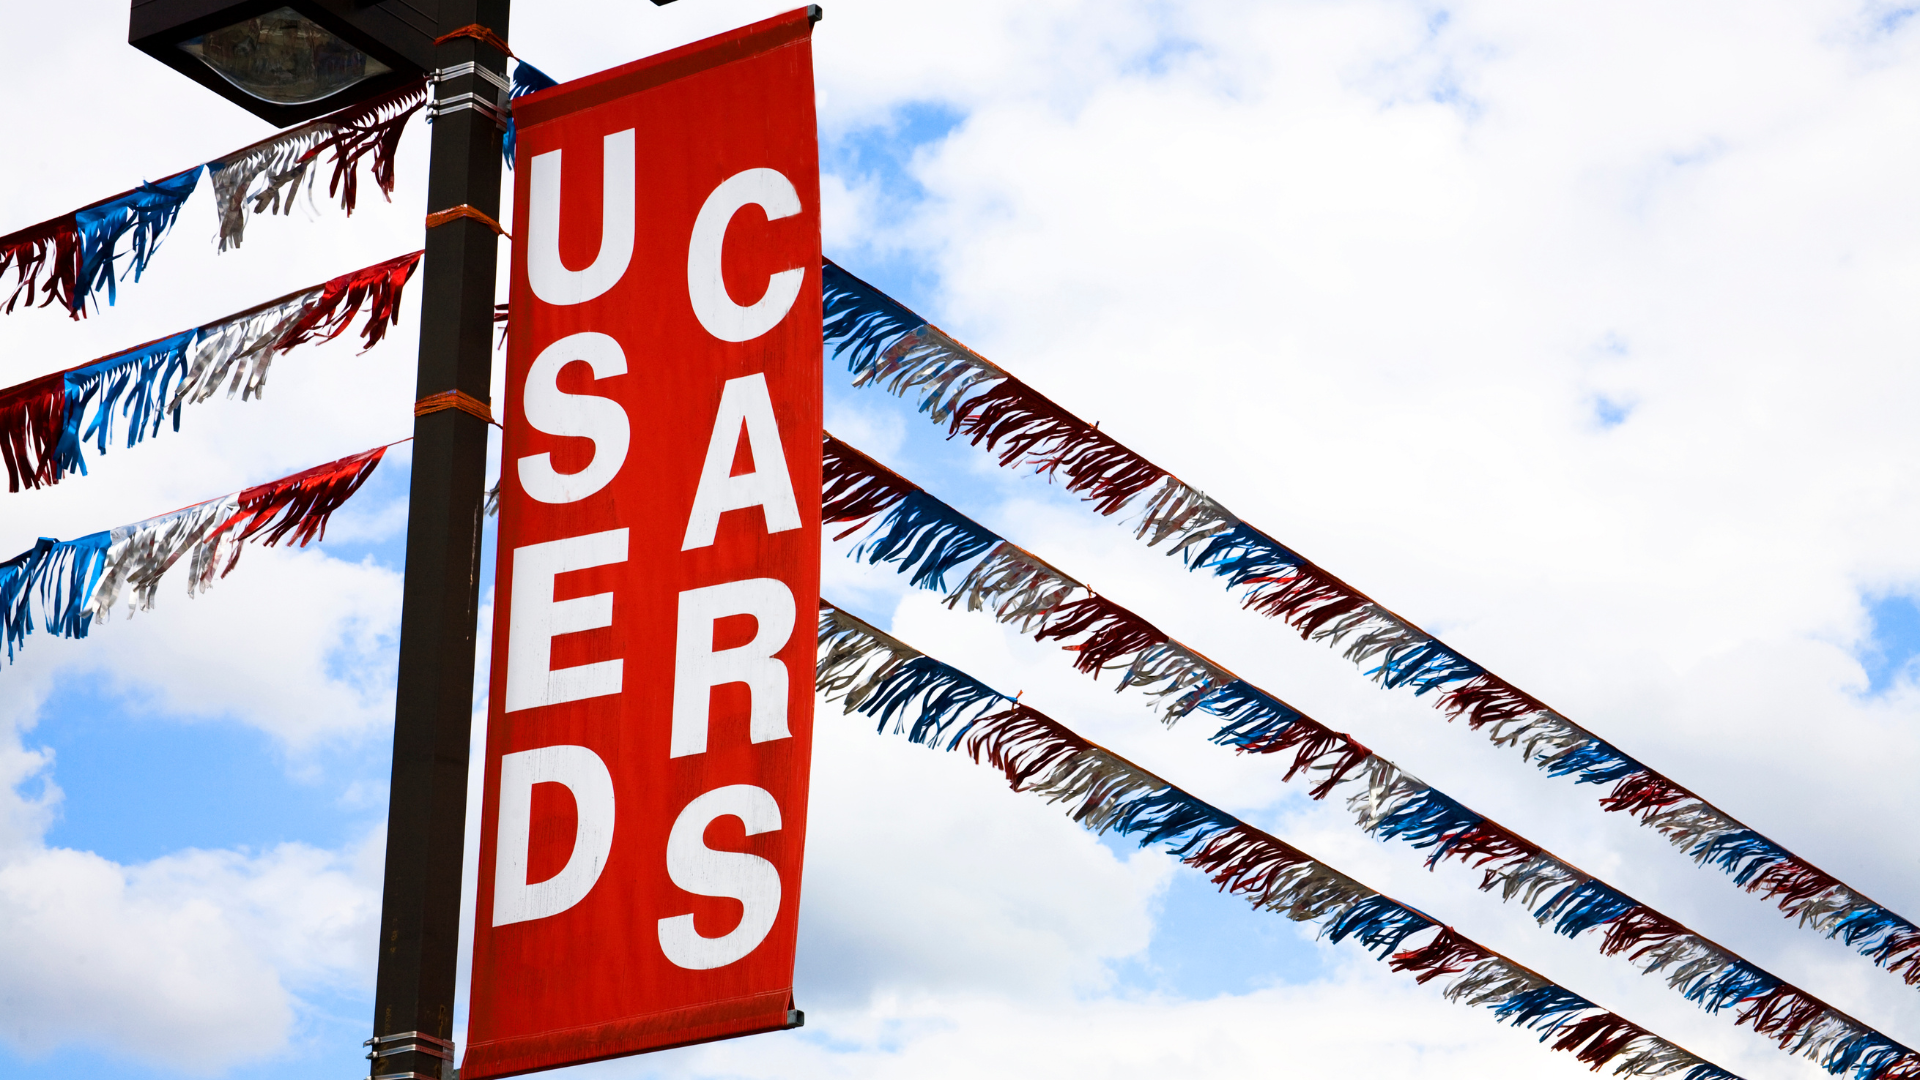 used car sign for a sweepstakes